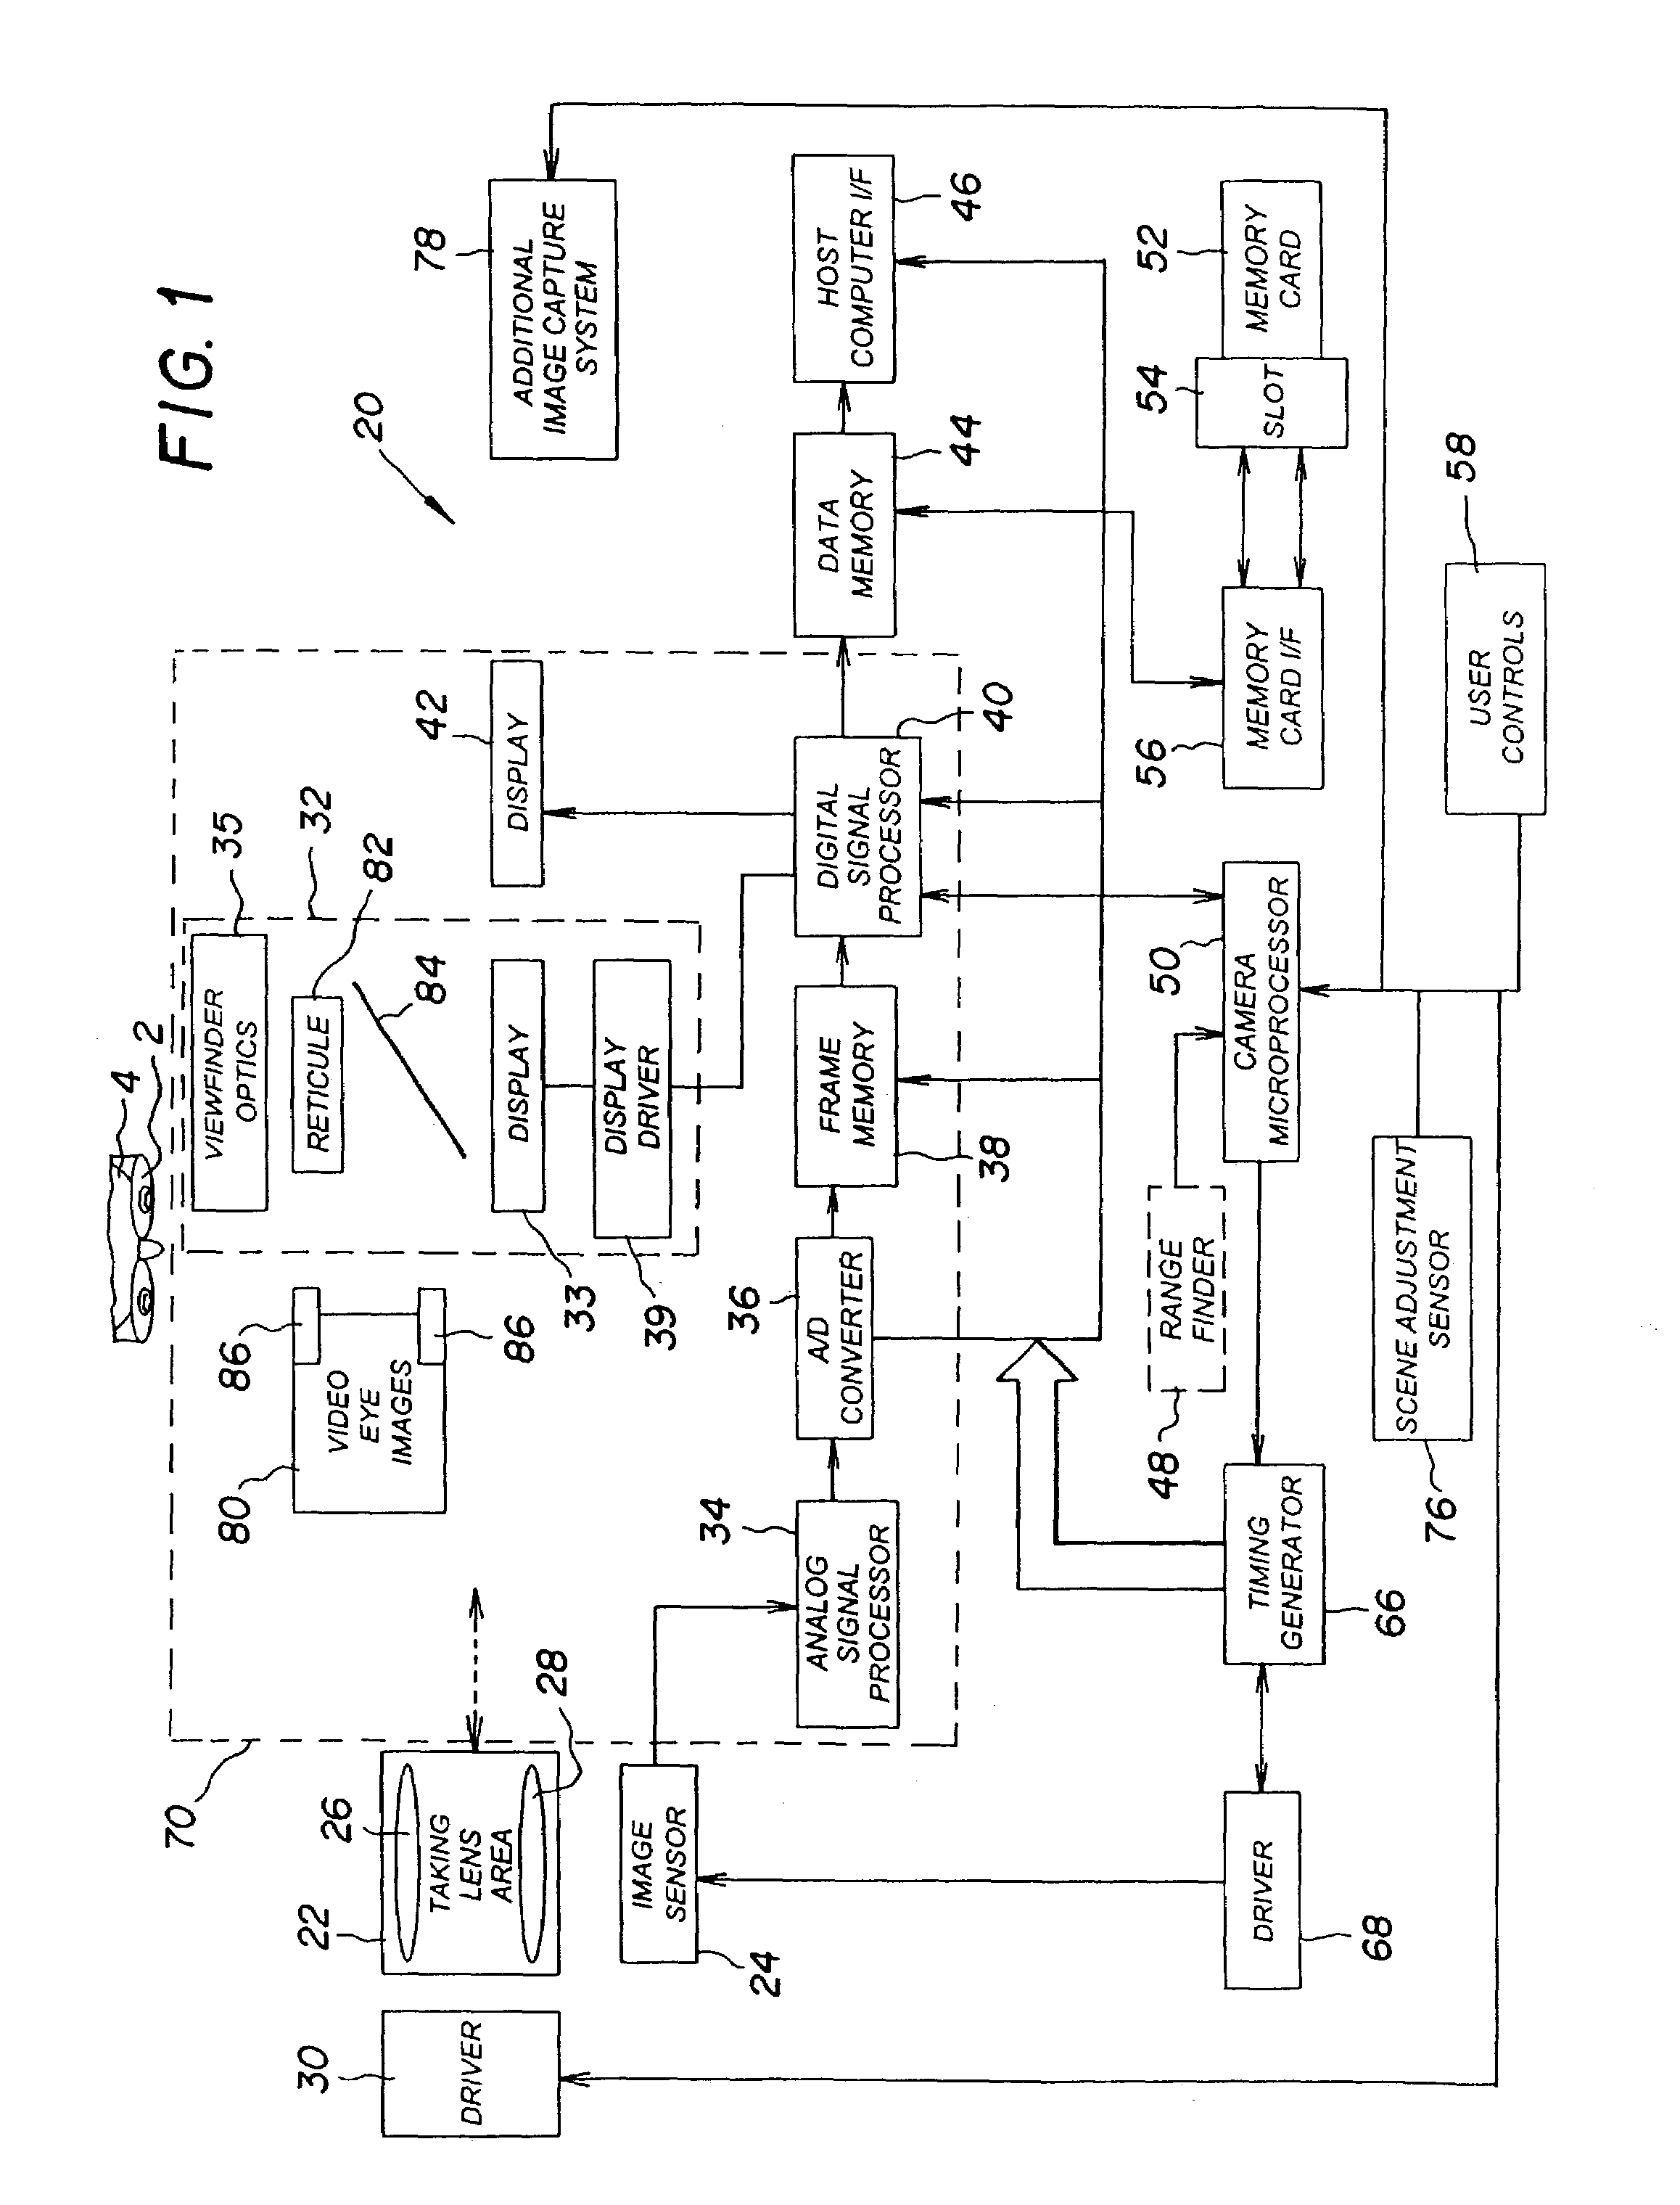 Method and computer program product for determining an area of importance in an image using eye monitoring information